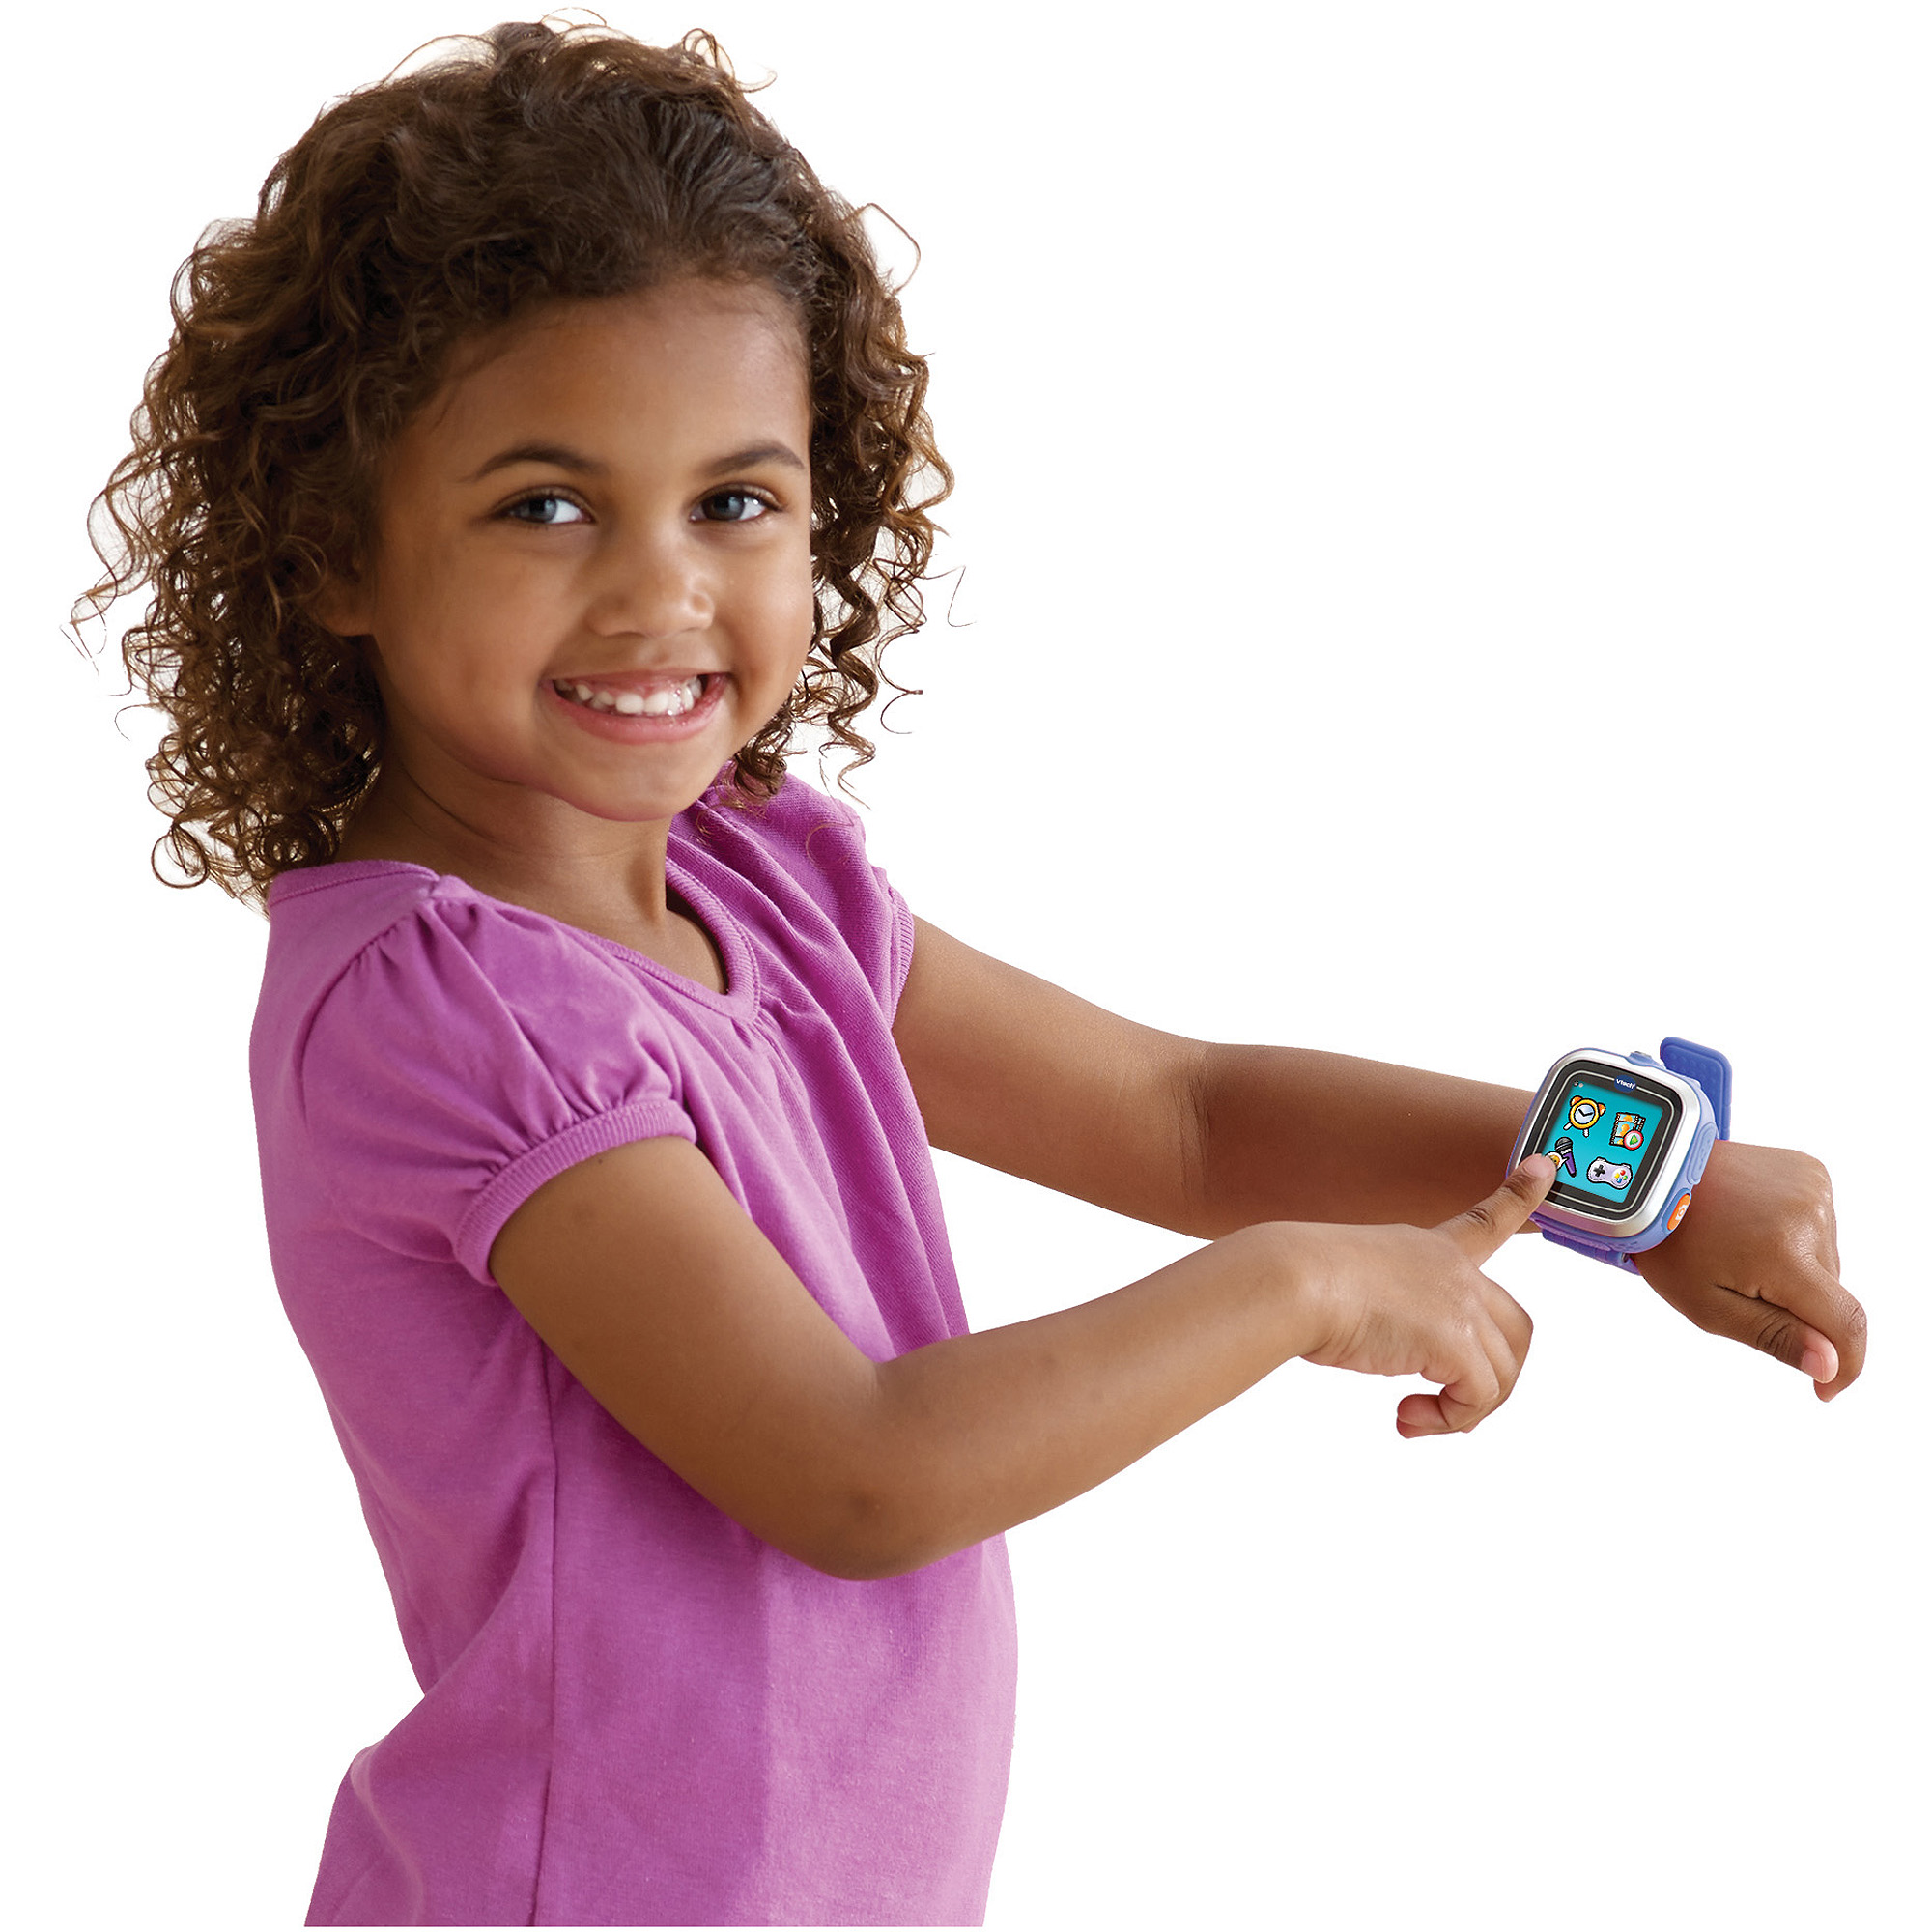 VTech Kidizoom Smartwatch in Blue, Green, Pink, and White - image 1 of 5